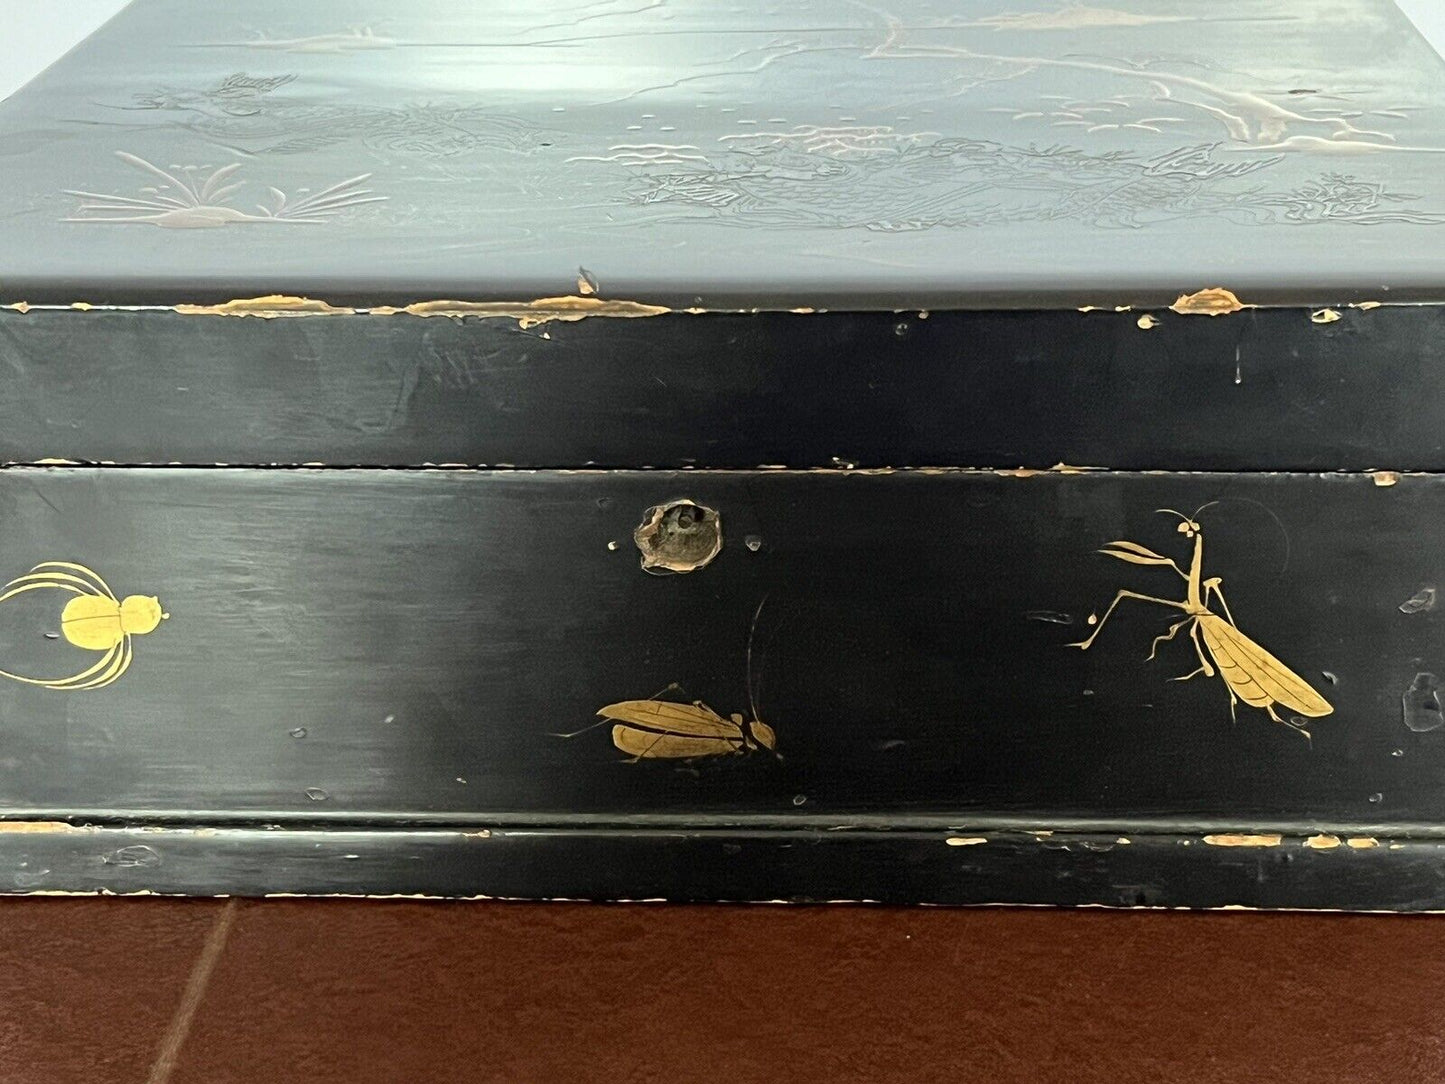 Edwardian Japanese Lacquer Jewelley Box With 4 Inner Boxes.